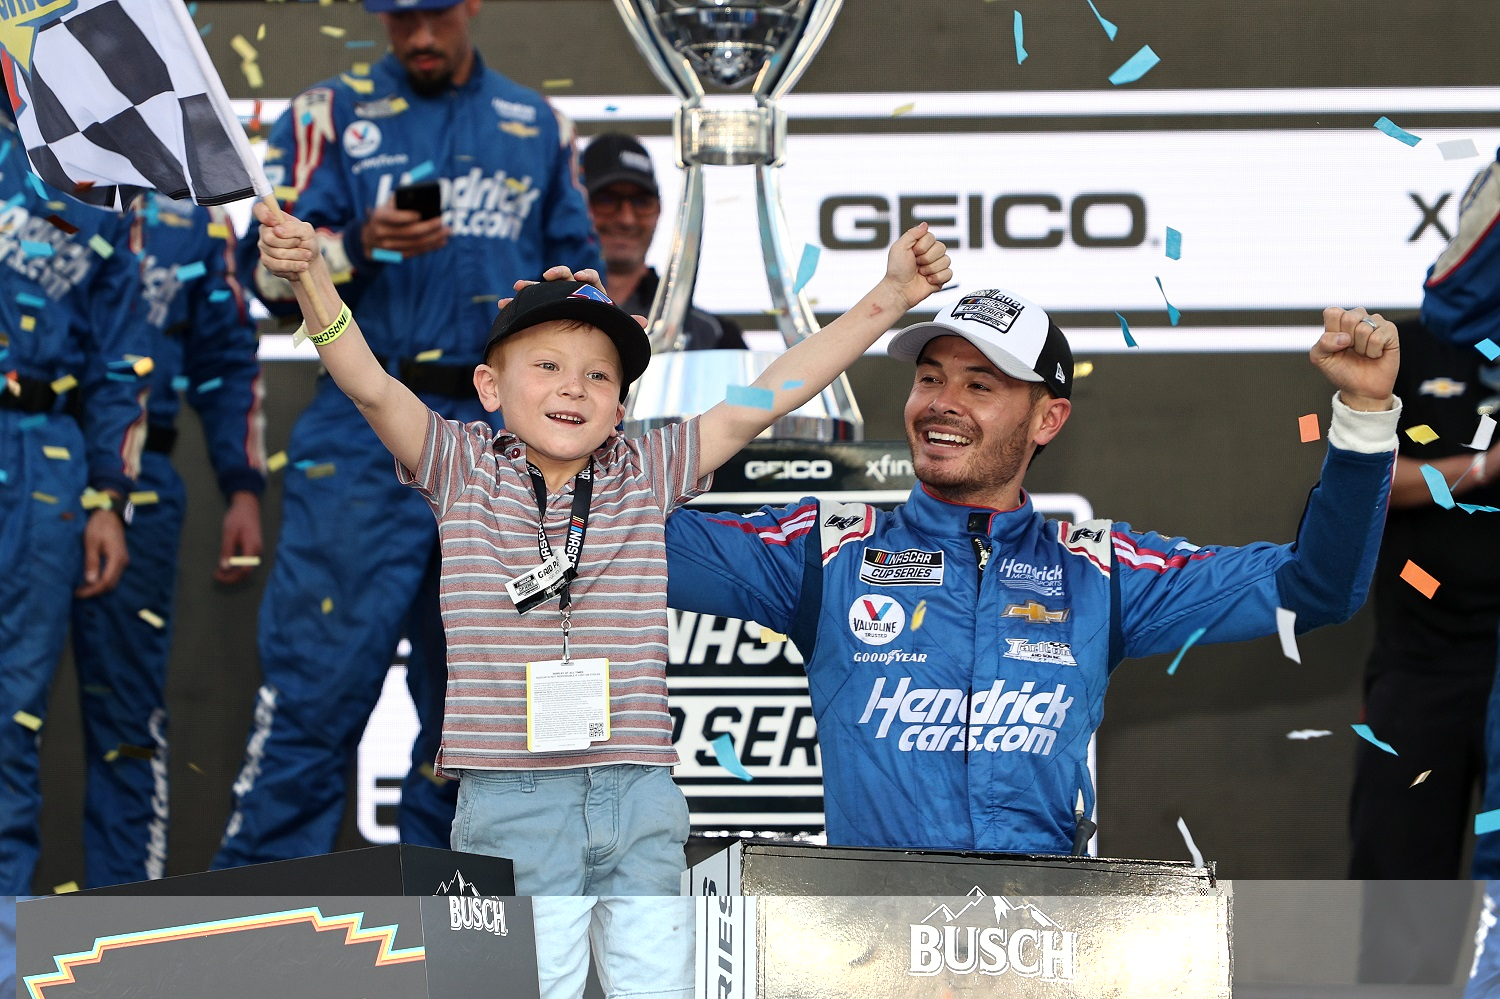 Kyle Larson, driver of the No. 5 Chevrolet, celebrates with his son, Owen, in victory lane after winning the NASCAR Cup Series Championship at Phoenix Raceway on Nov. 7, 2021.